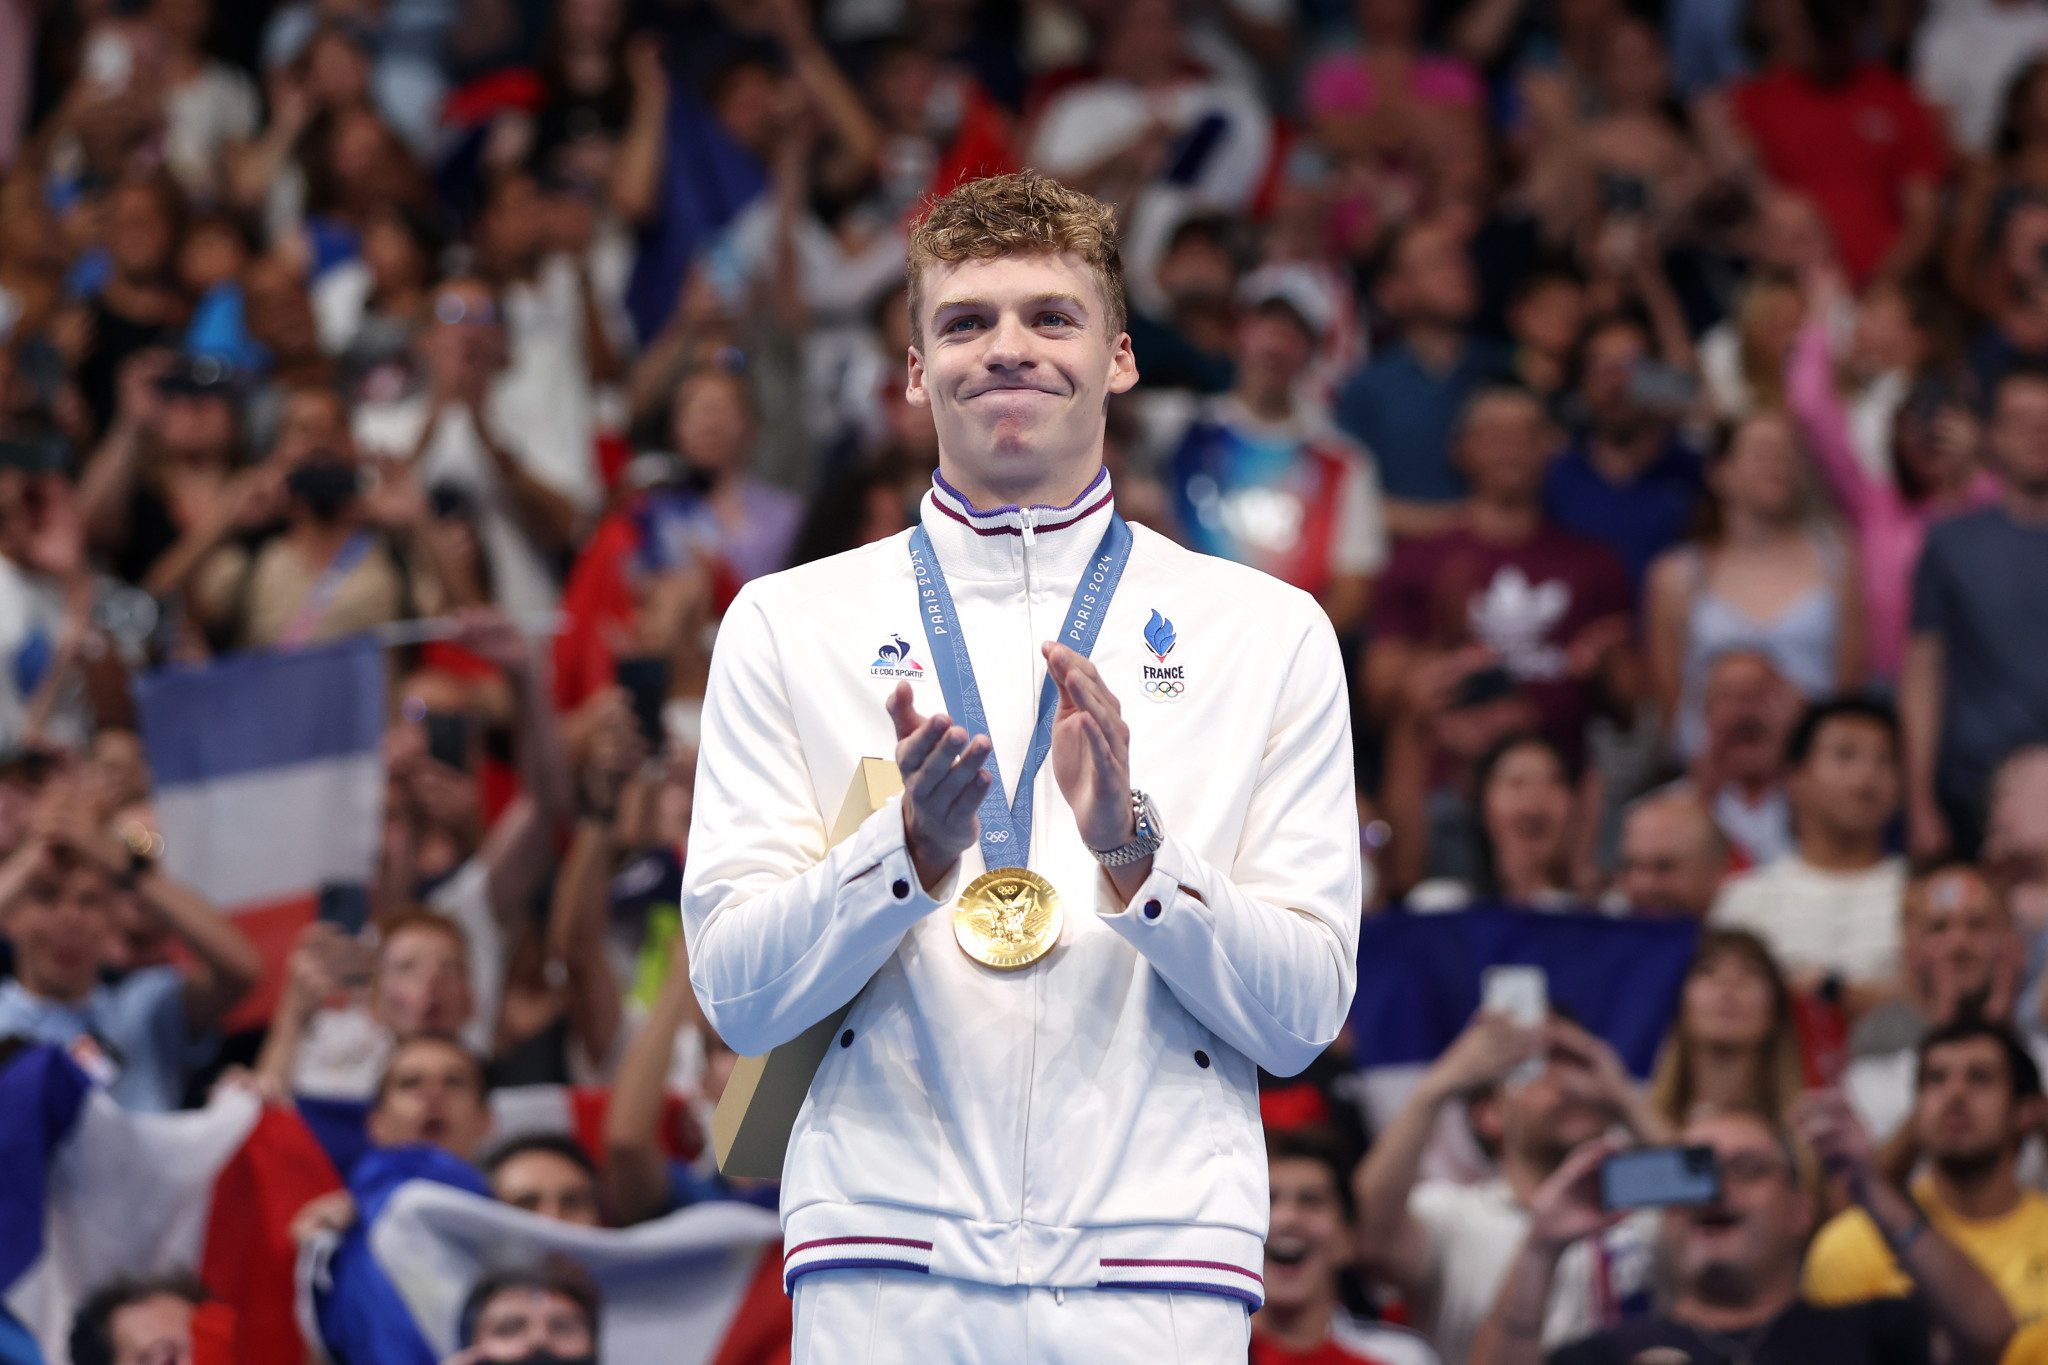 Gold Medalist Leon Marchand of Team France on the podium after the Men's 200m Individual Medley Final at the Paris 2024 Olympic Games. GETTY IMAGES